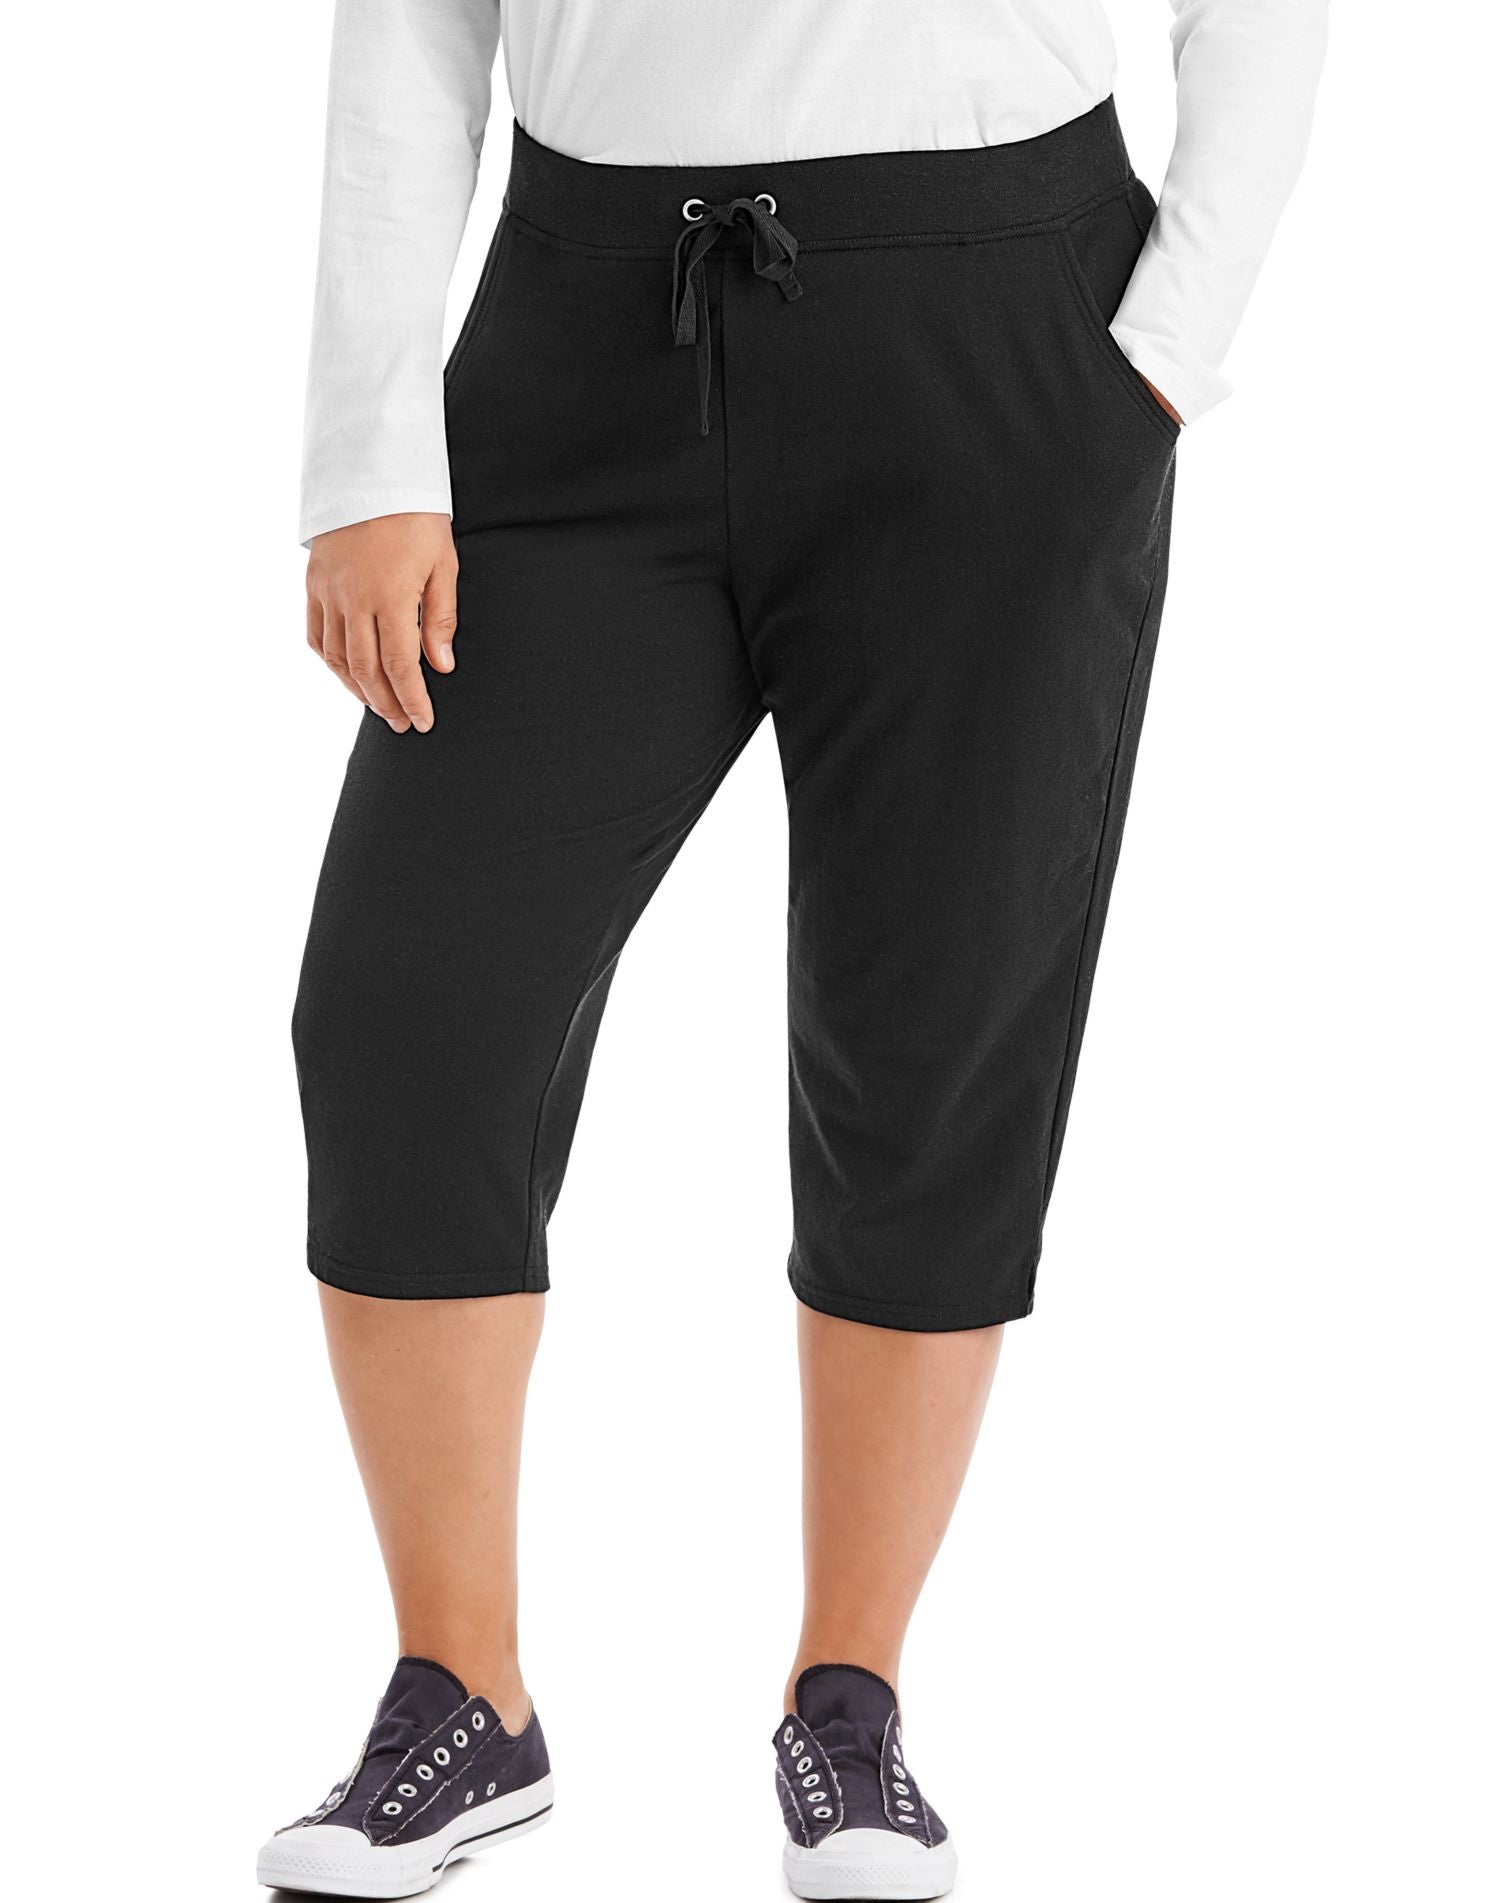 OJ185 - Just My Size Womens French Terry Capris